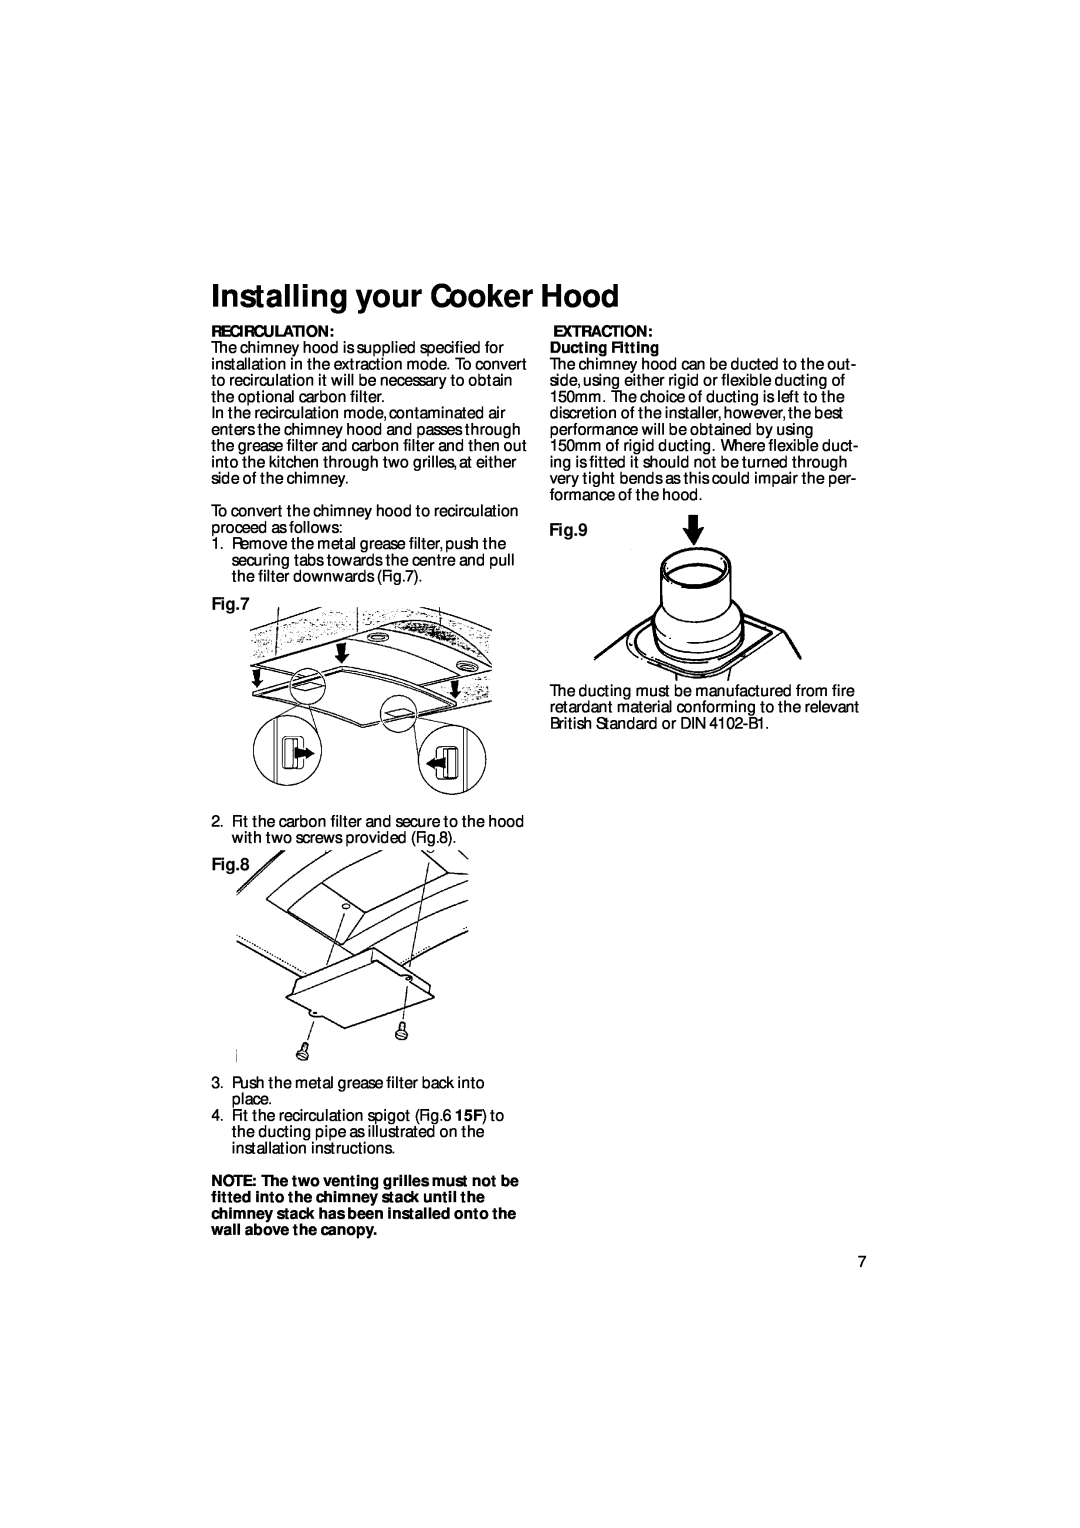 Creda CRC95 manual Installing your Cooker Hood, Recirculation, EXTRACTION Ducting Fitting 